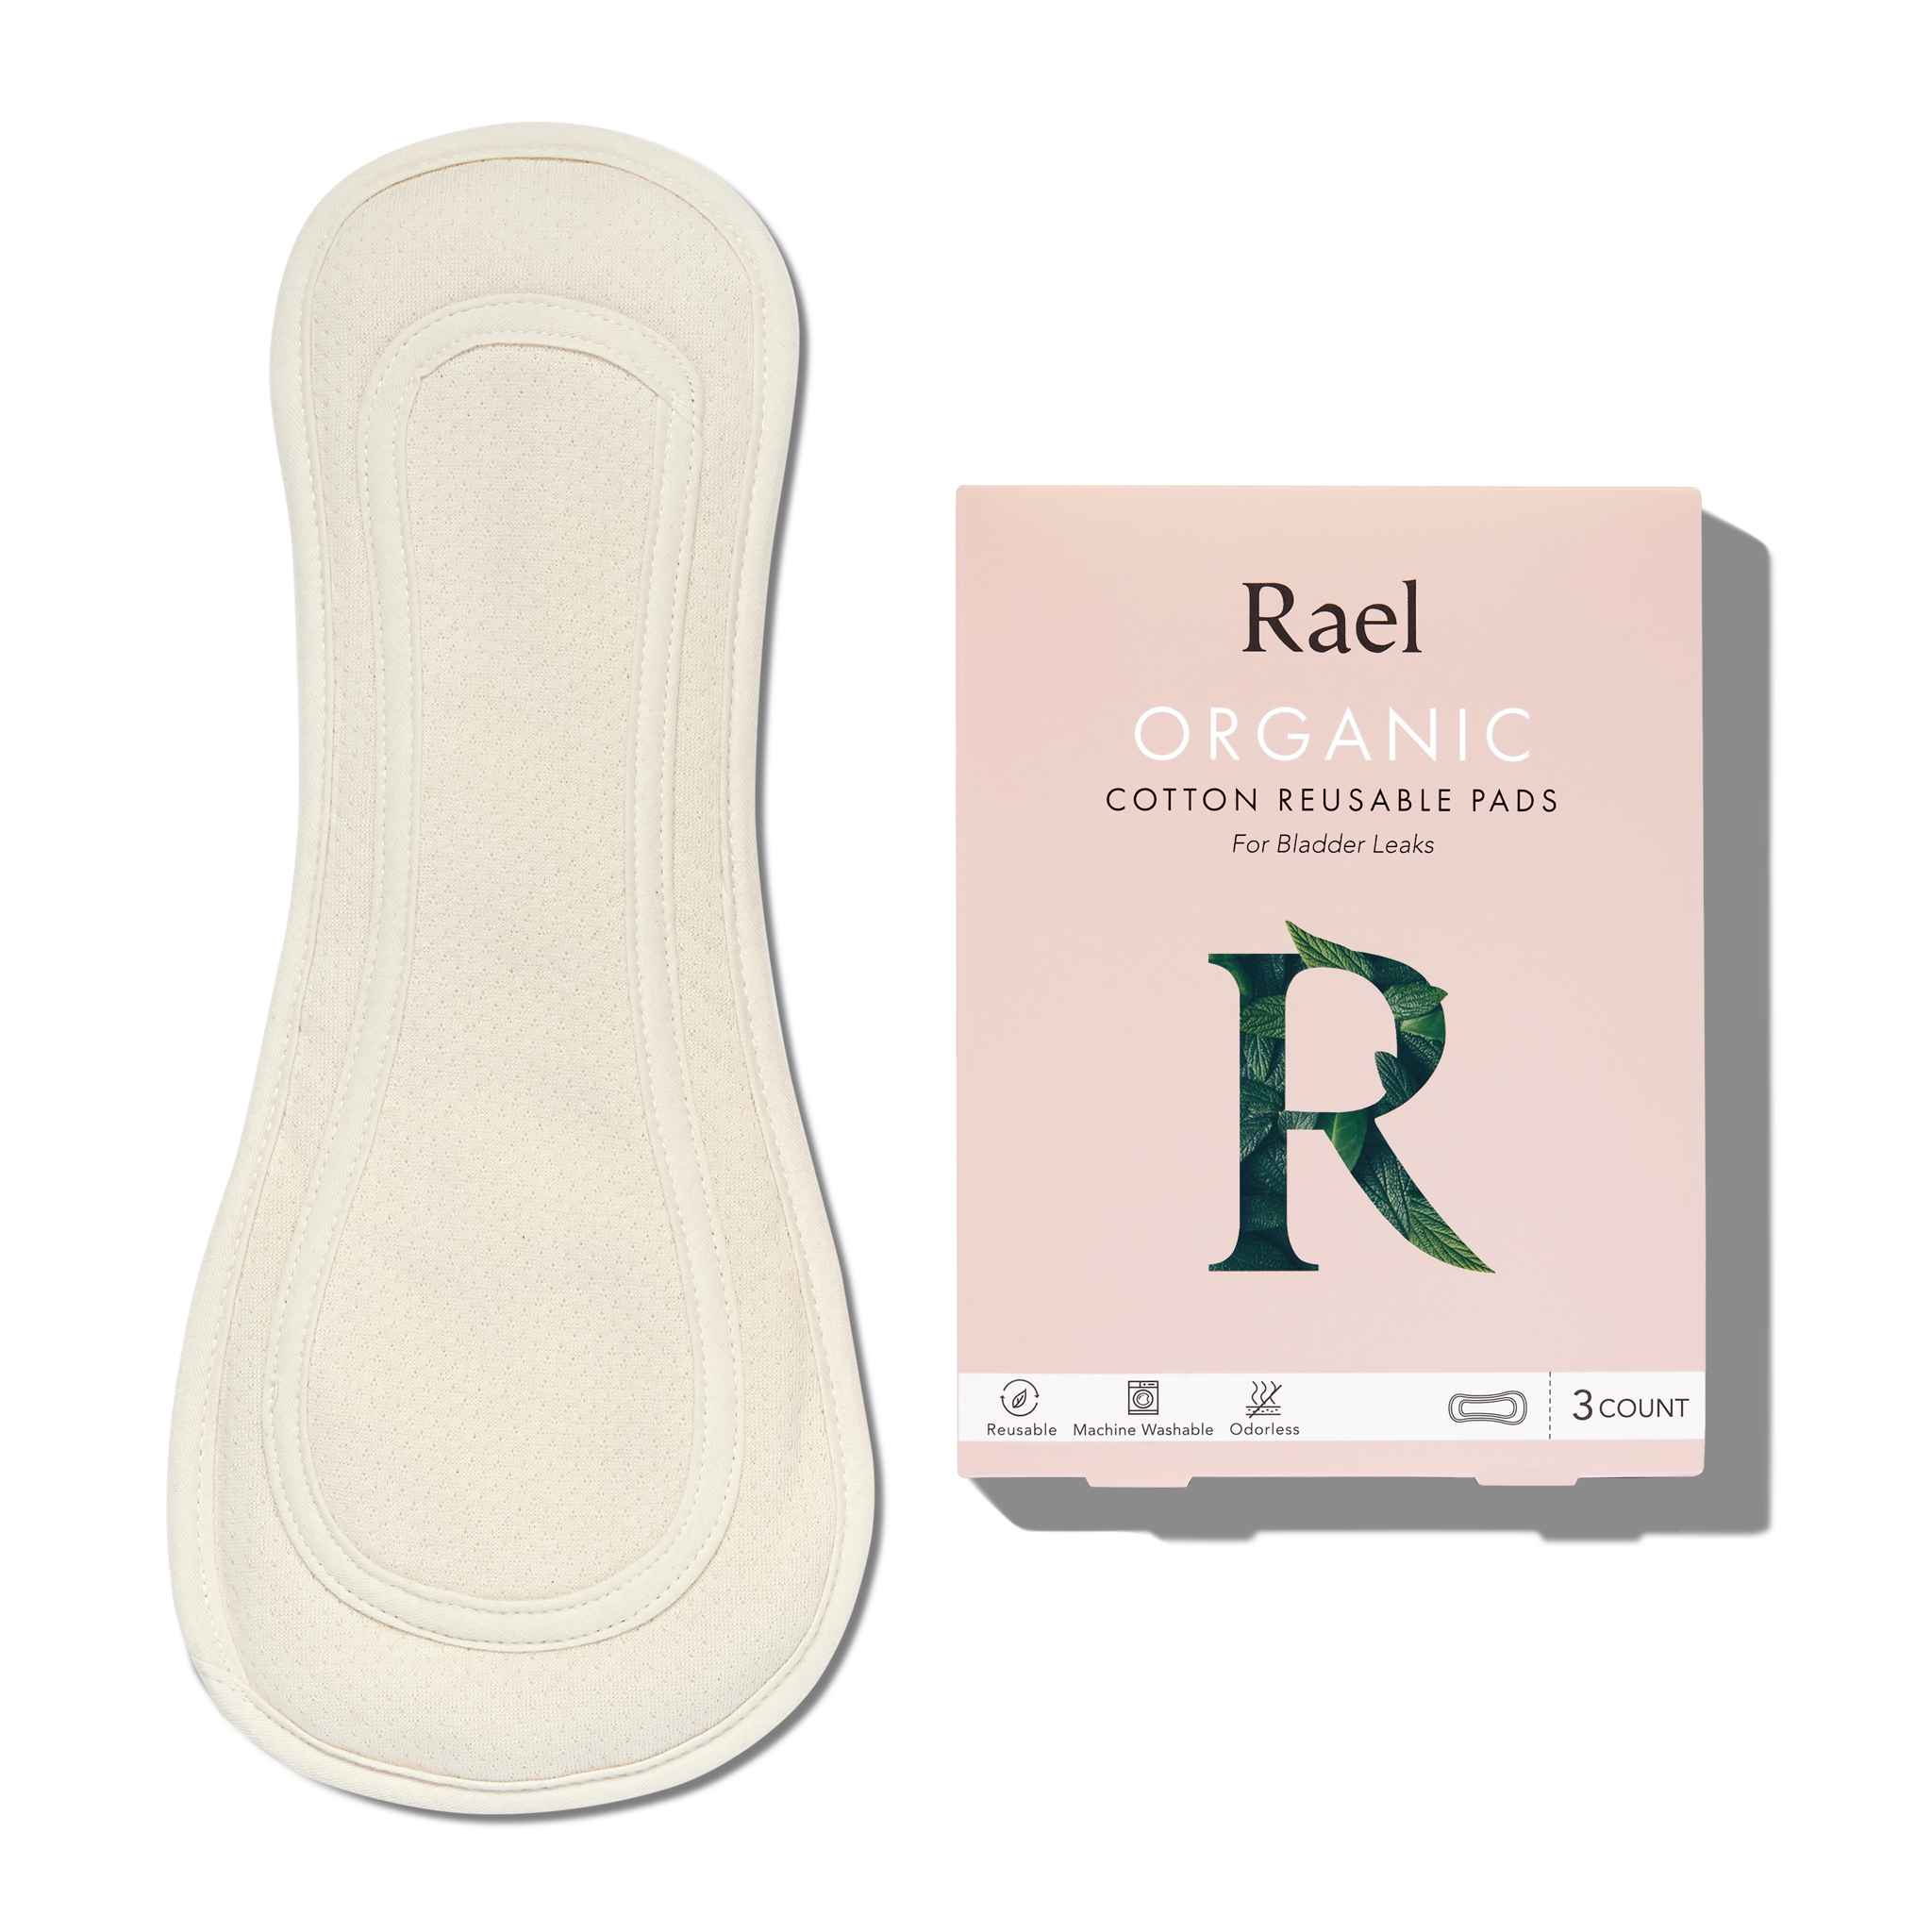 Reusable Incontinence Pads Incontinence protection products